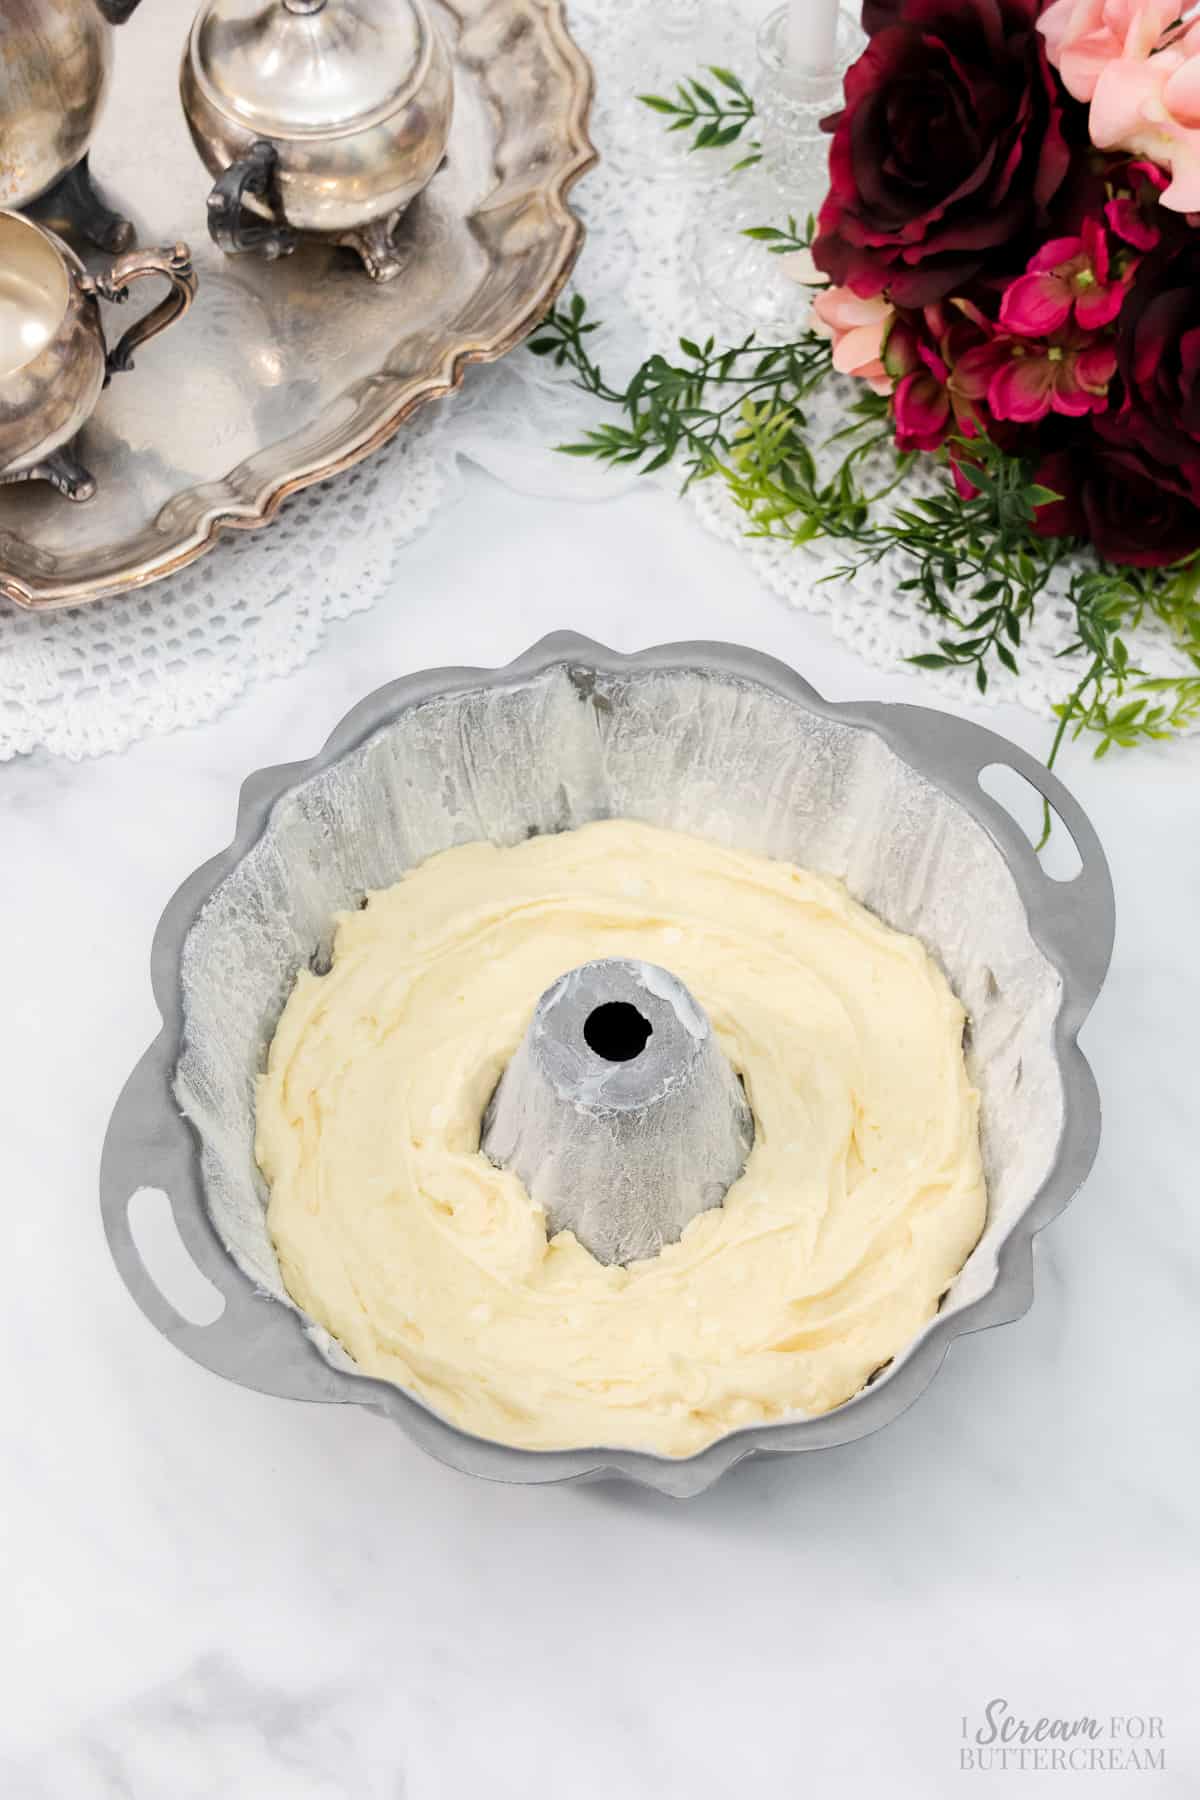 Adding a portion of the cake batter to the bundt pan.